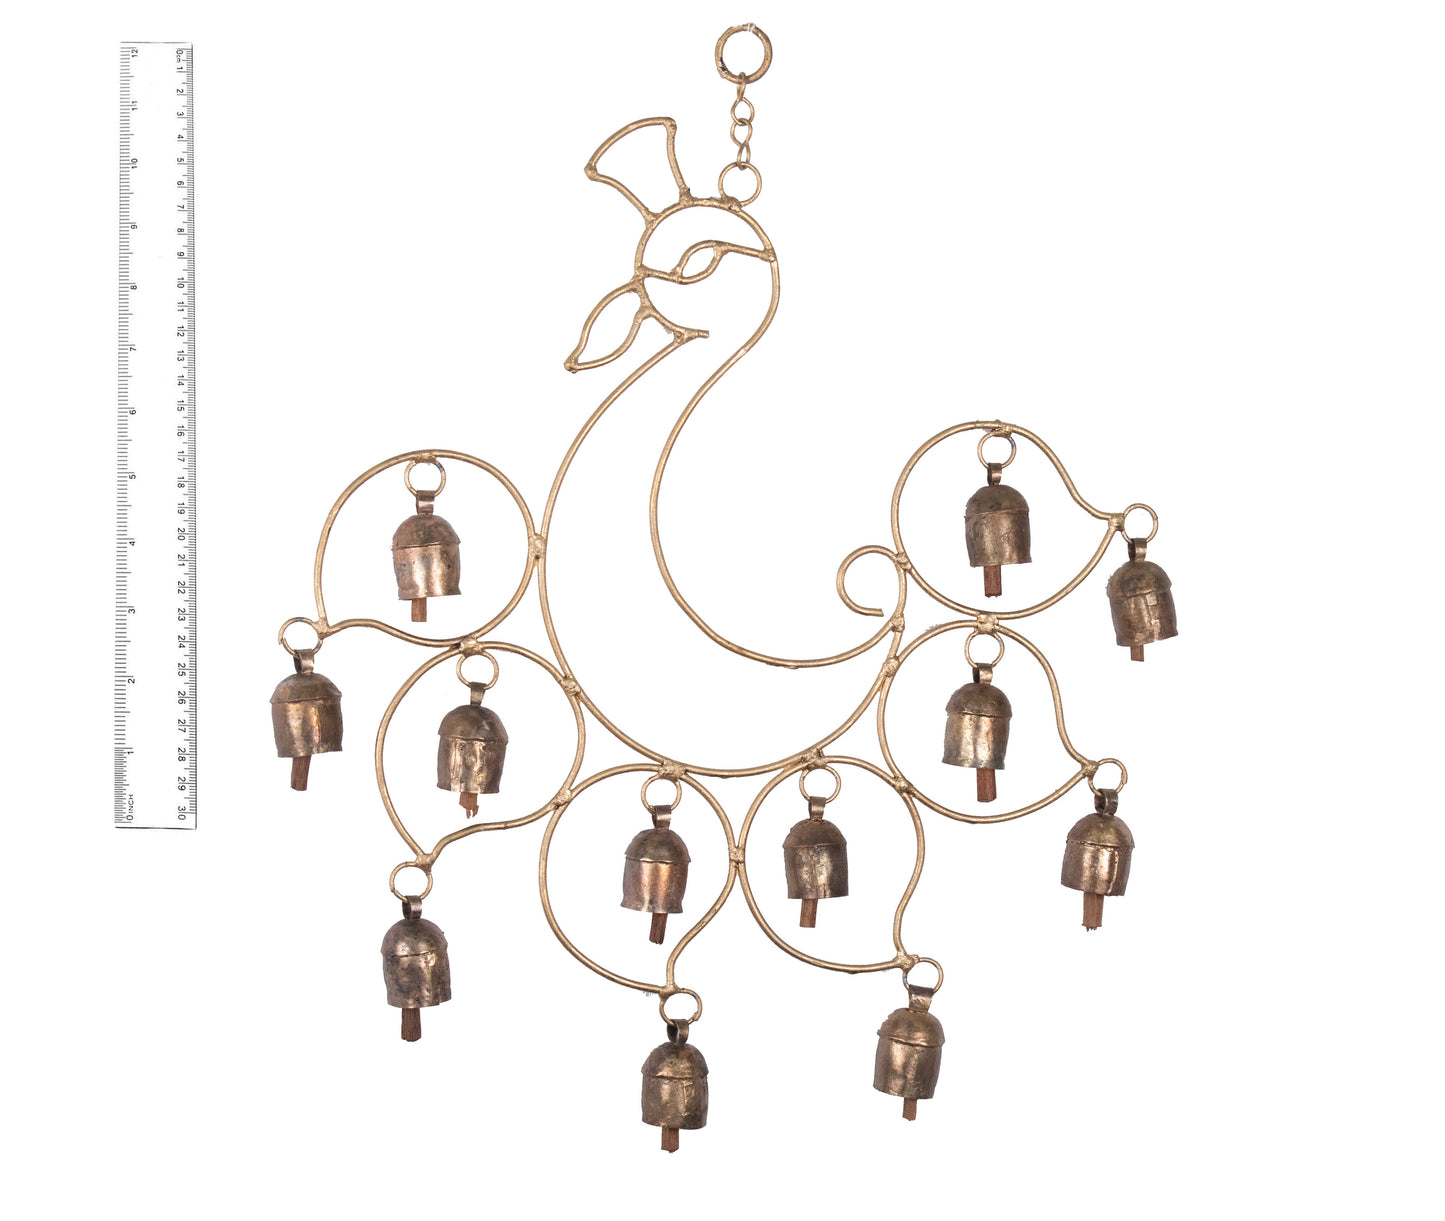 Hand Made Metal Bells Wrought Iron Copper-Zinc Coated Home Décor Chimes Cow Bell   - Peacock - 12 Bells  -  SKU: 0056